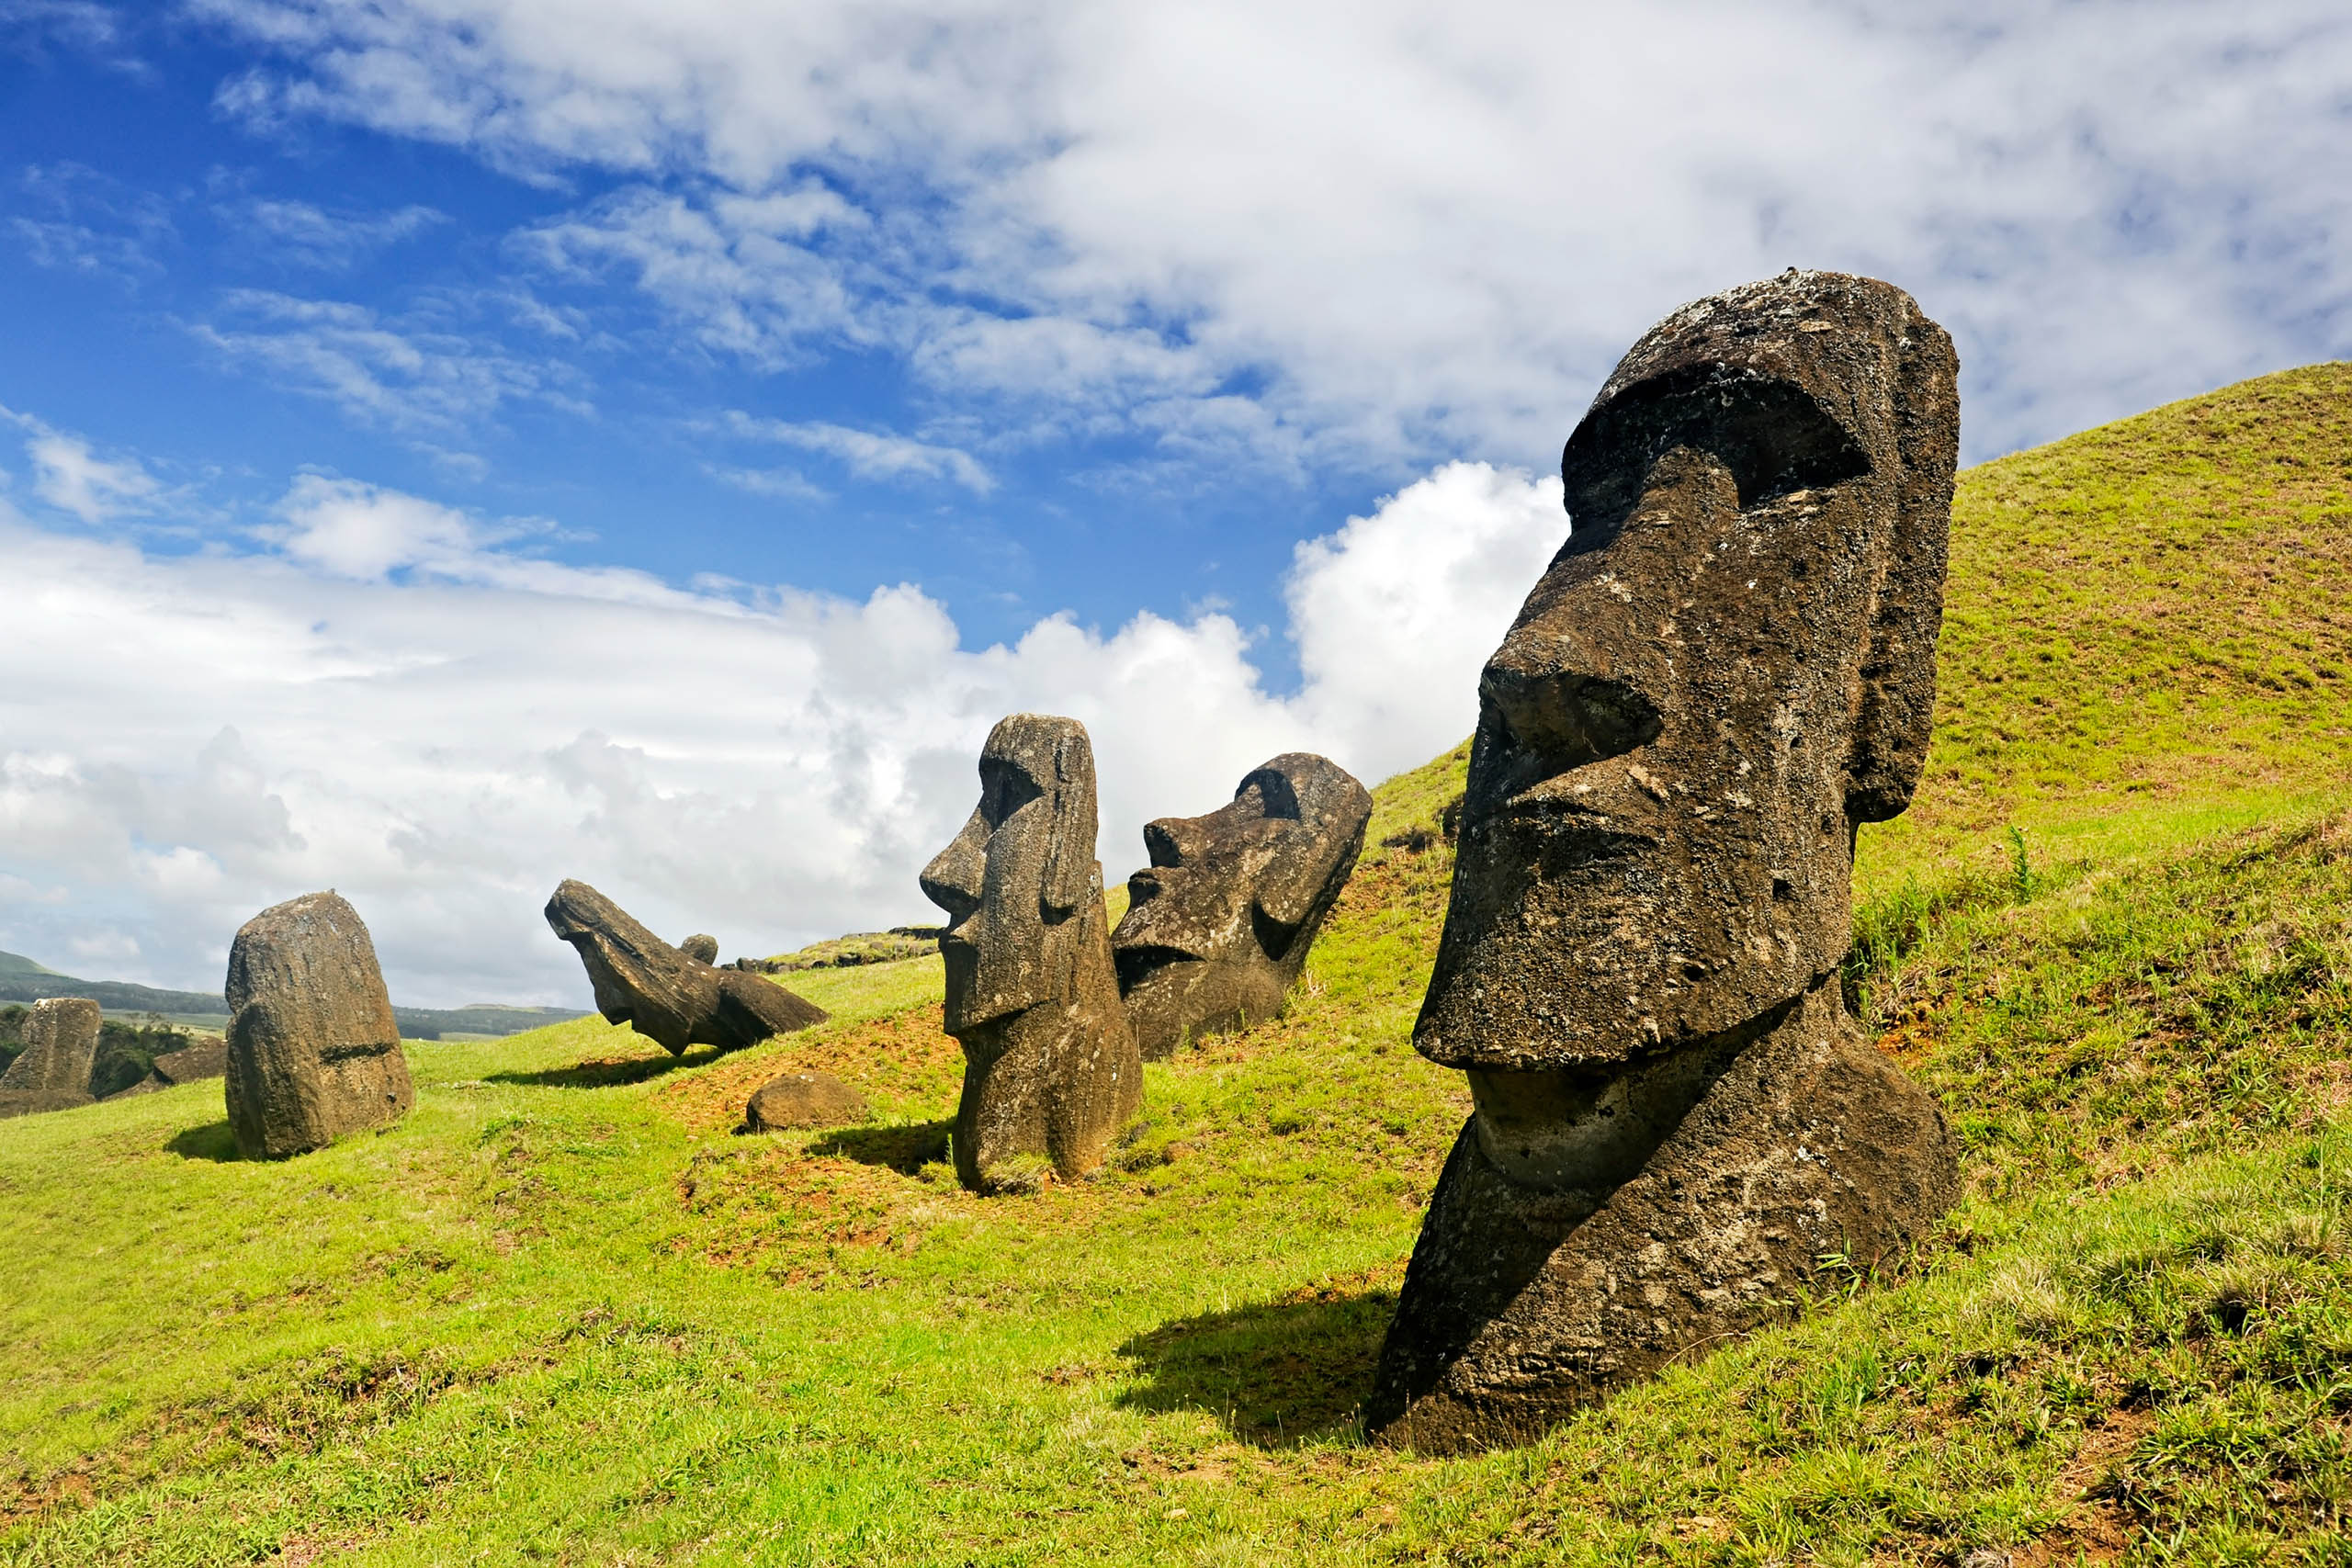 CHILE -FEBRUARY 6: Moais in Rapa Nui National Park on the slopes of Rano Raruku volcano on Easter Island, Chile.